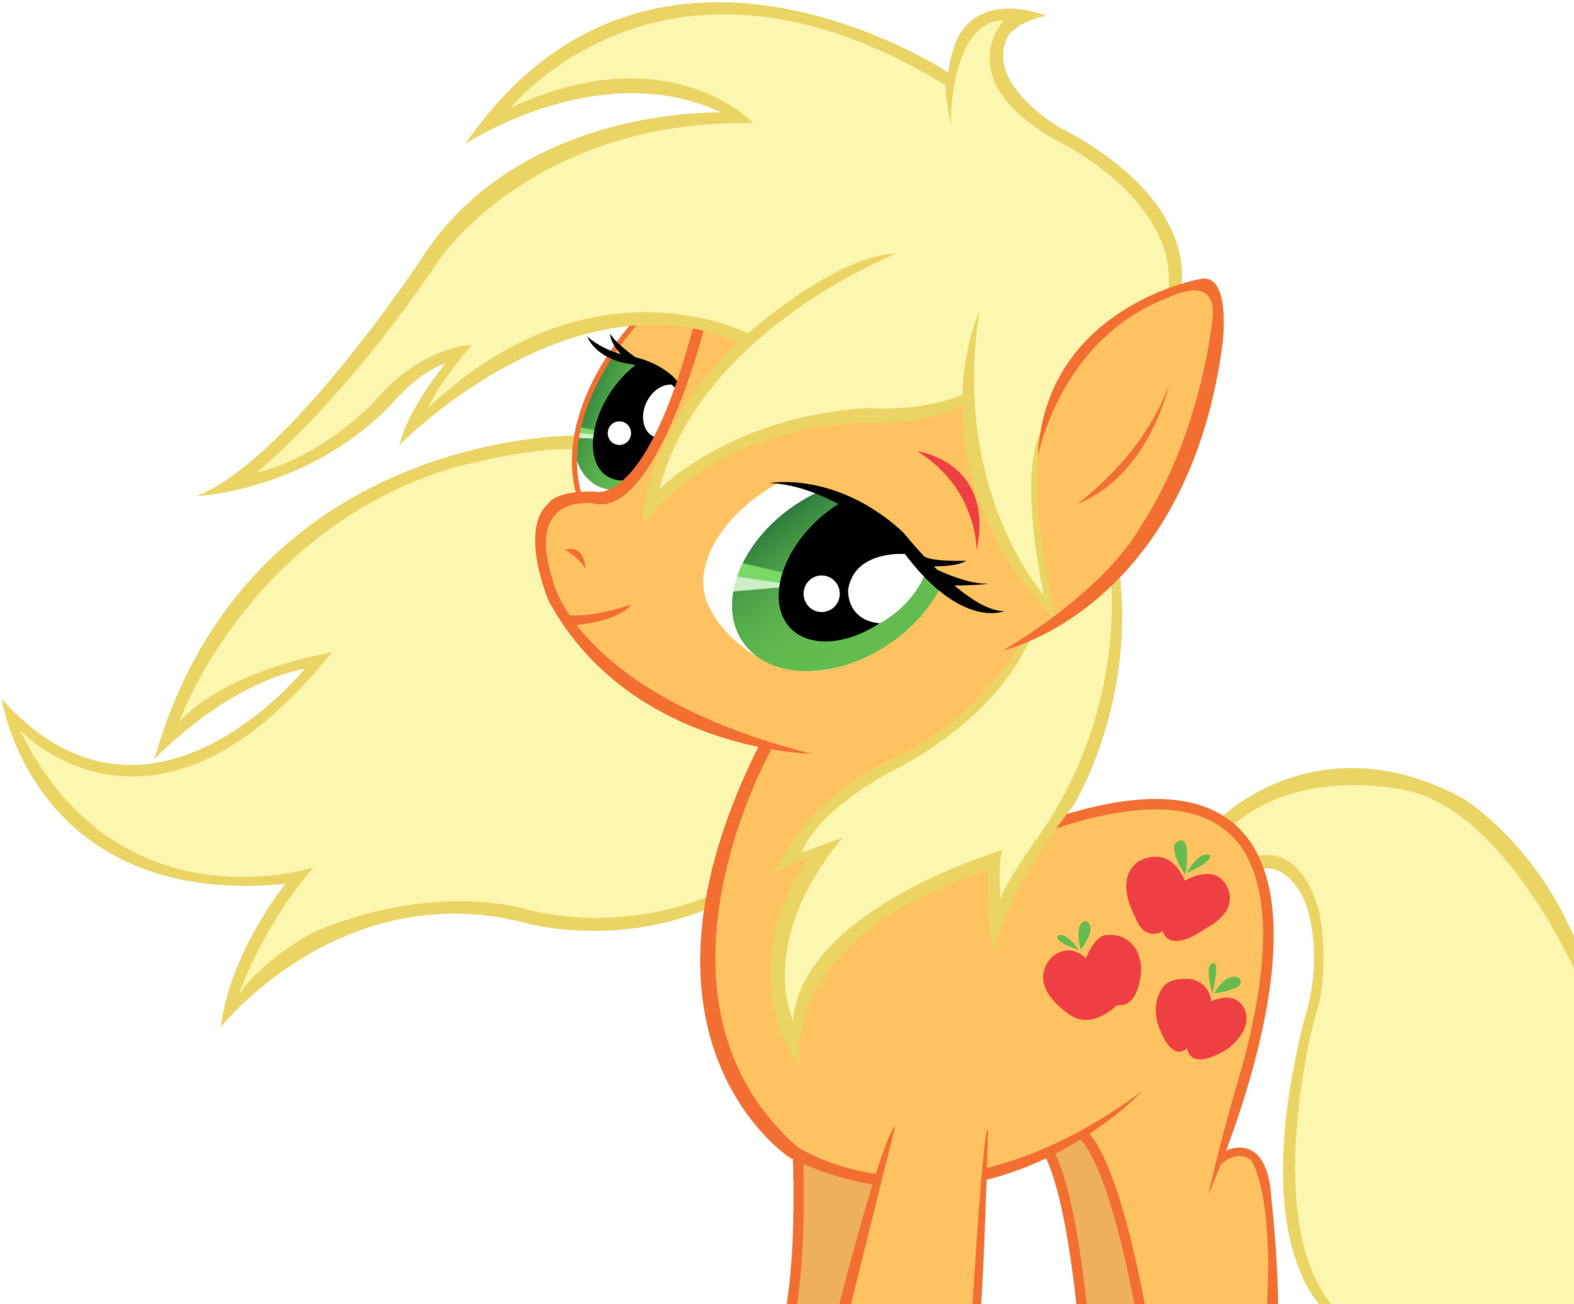 Applejack Looks So Pretty With Her Hair Down - Applejack With Her Hair Down (1600x1320)